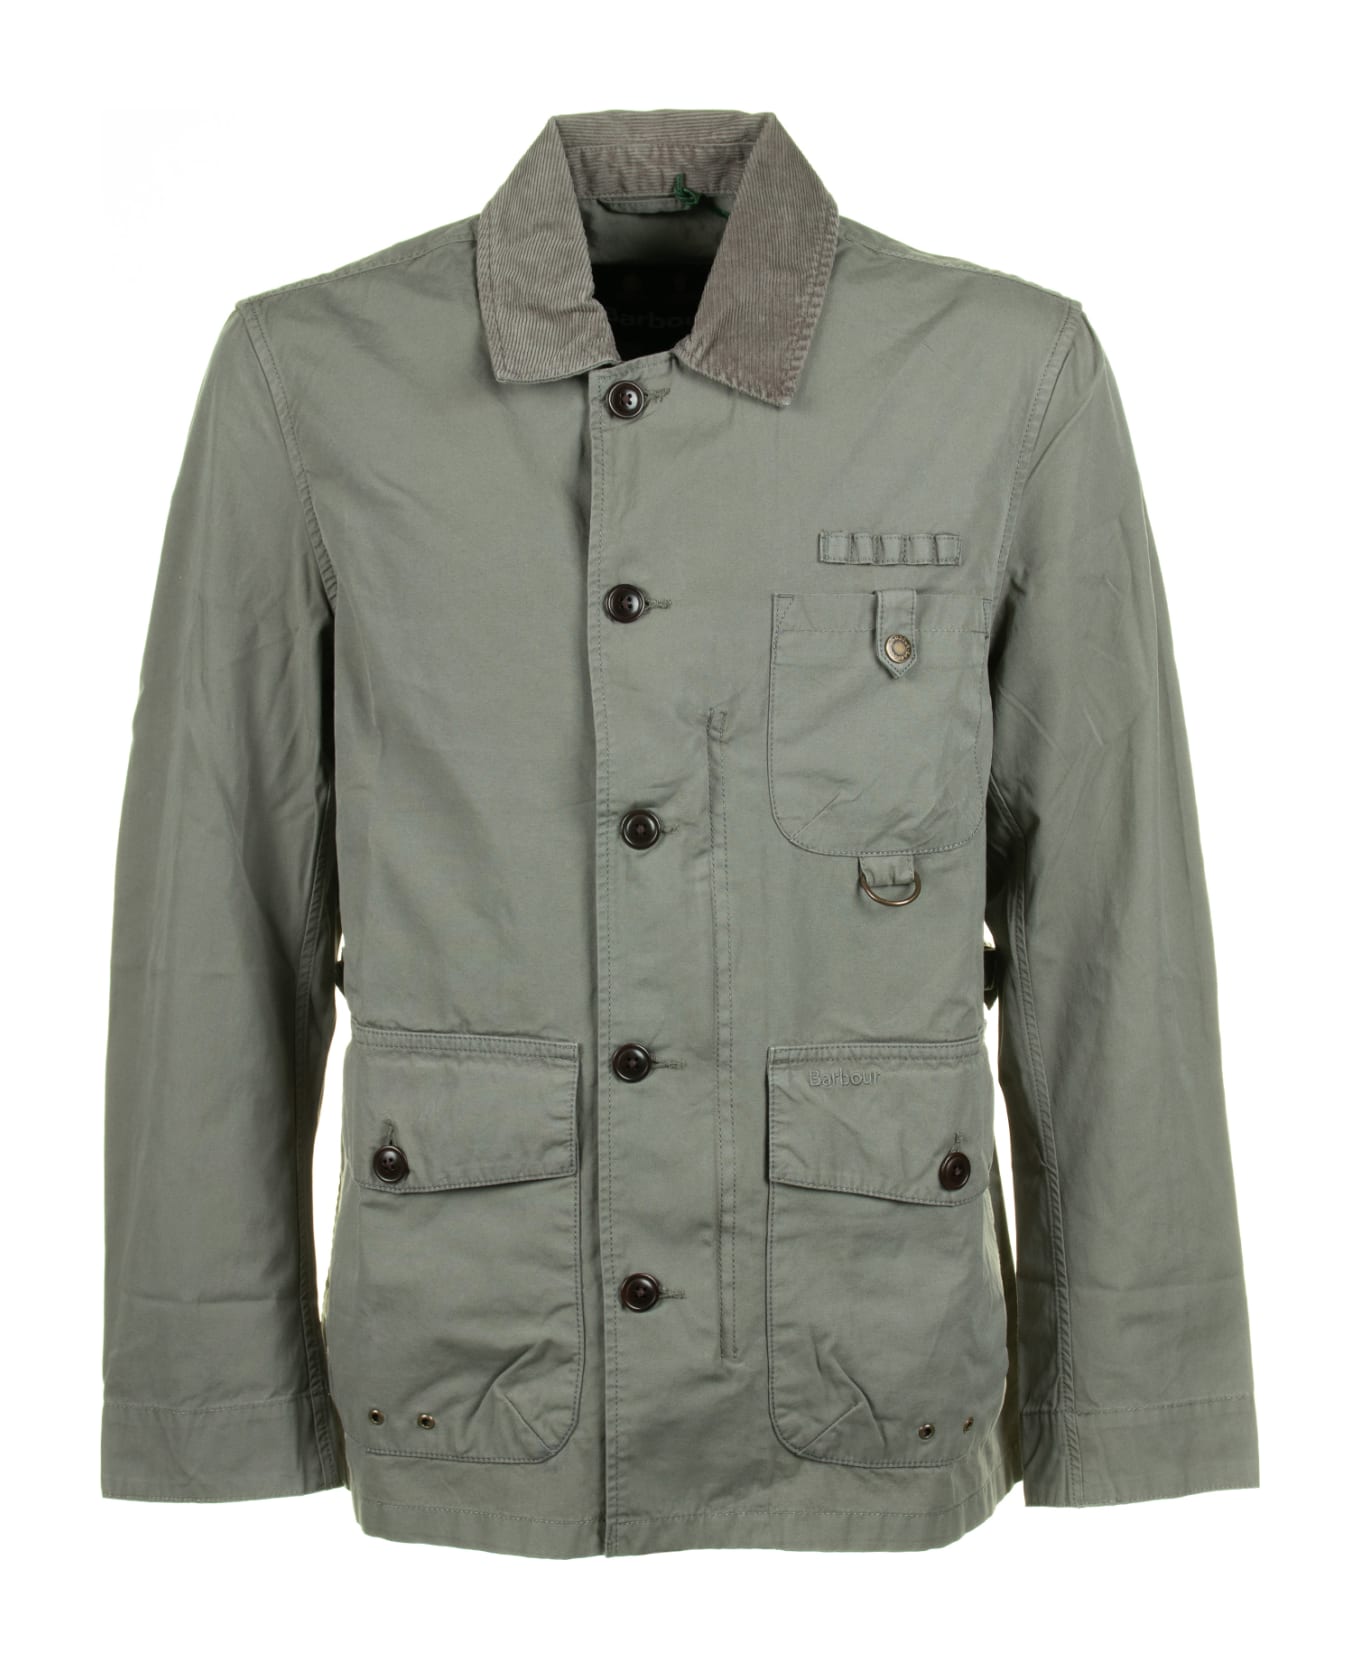 Barbour Cotton Jacket With Pockets And Buttons - AGAVE ジャケット